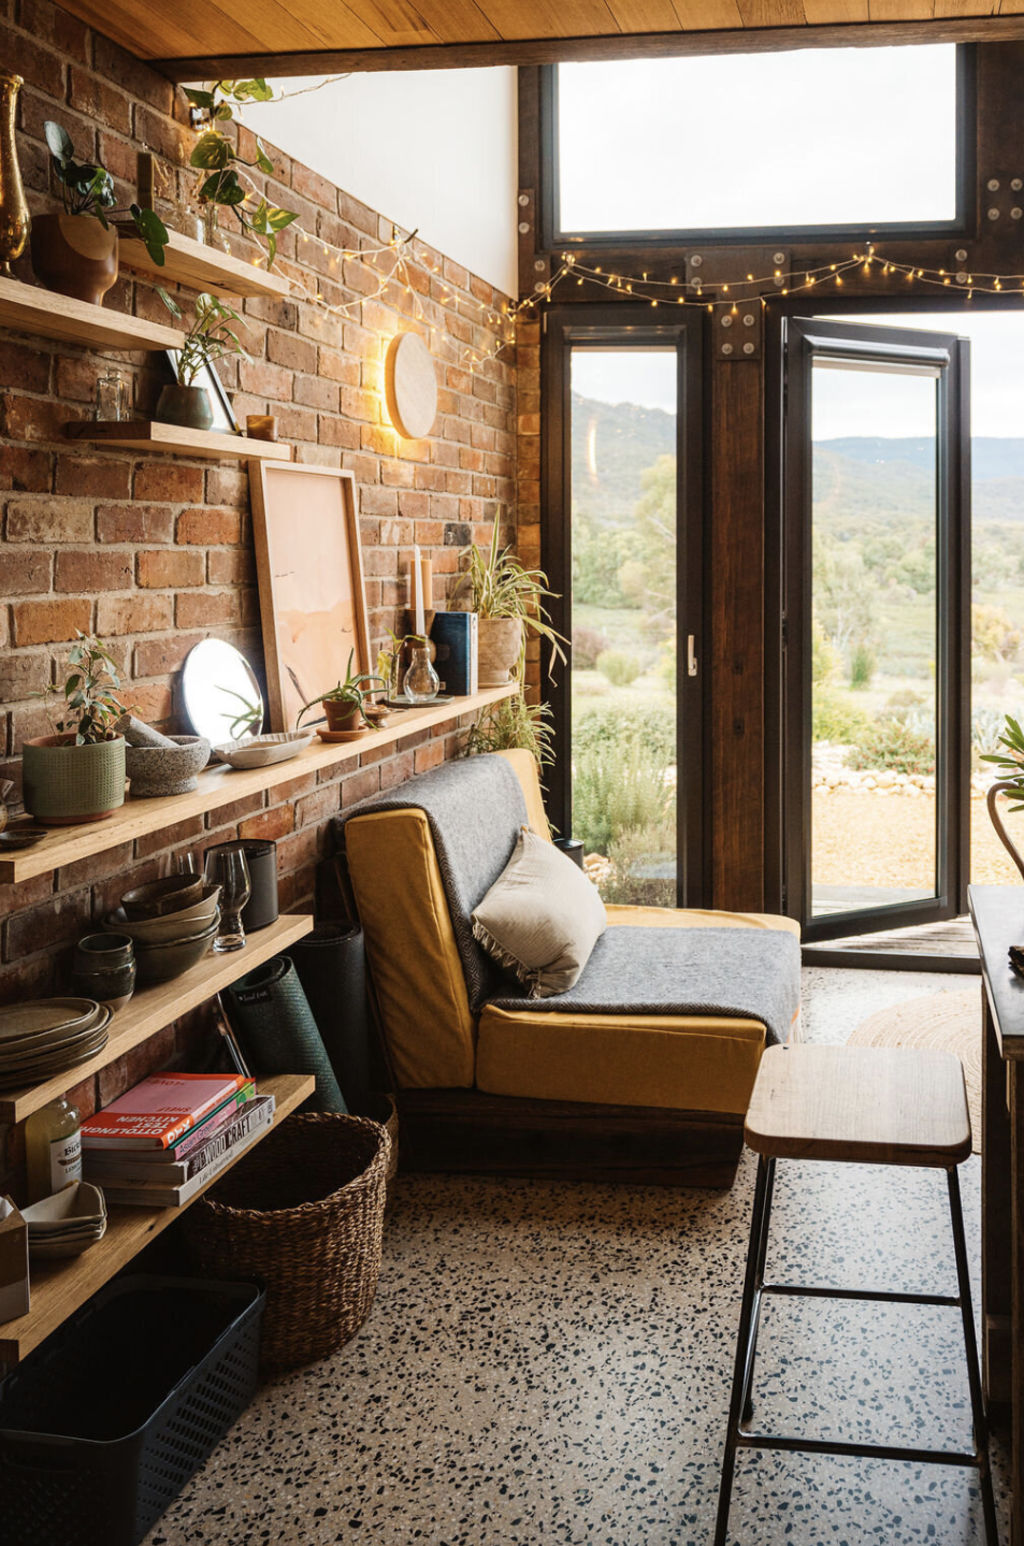 Bailey-Webb designed The Nook himself, with inspiration from overseas travels, particularly the country-style cottages and barns of England. Photo: Harley Brown